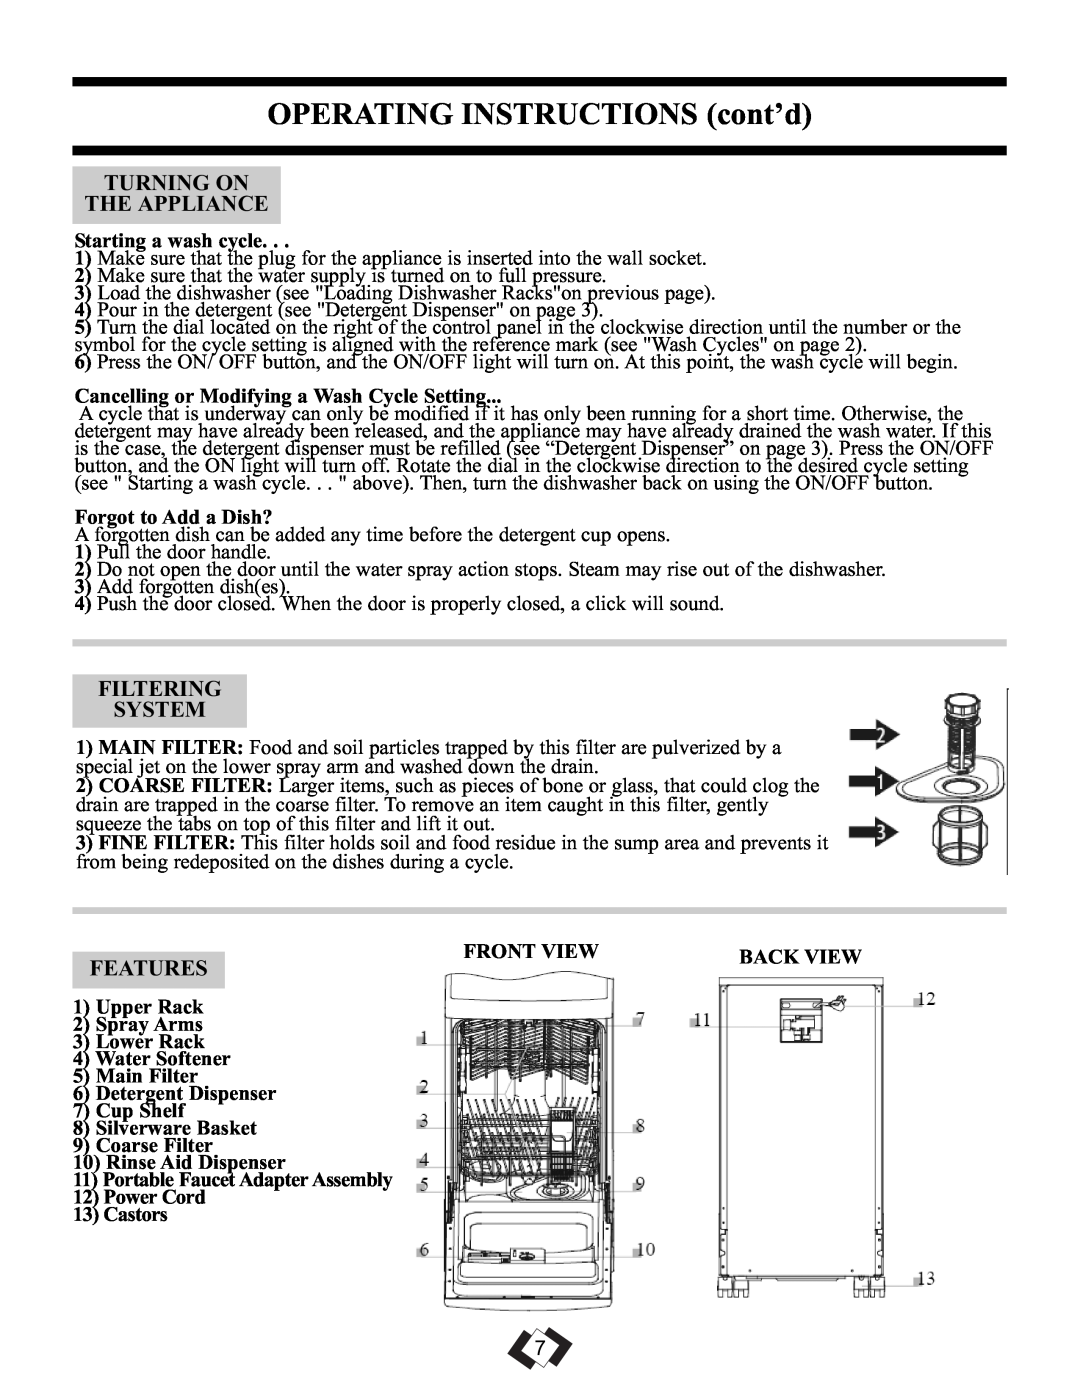 Danby DDW1899WP-1 OPERATING INSTRUCTIONS cont’d, Turning On The Appliance, Filtering System, Features 